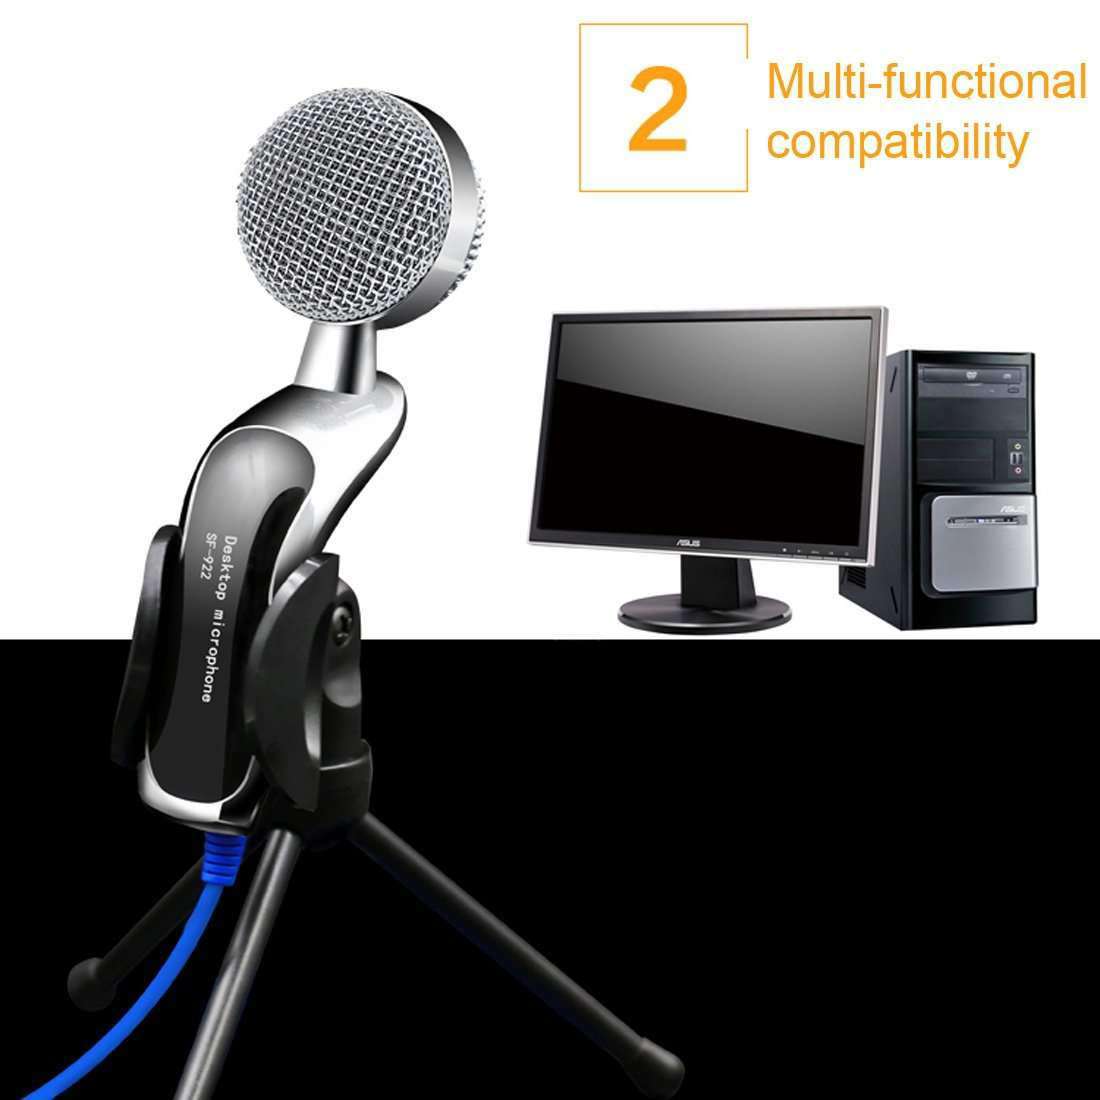 Professional Condenser Sound Recording Microphone with Tripod Holder, Cable Length: 2.0m, Compatible with PC and Mac for  Live Broadcast Show, KTV, etc.